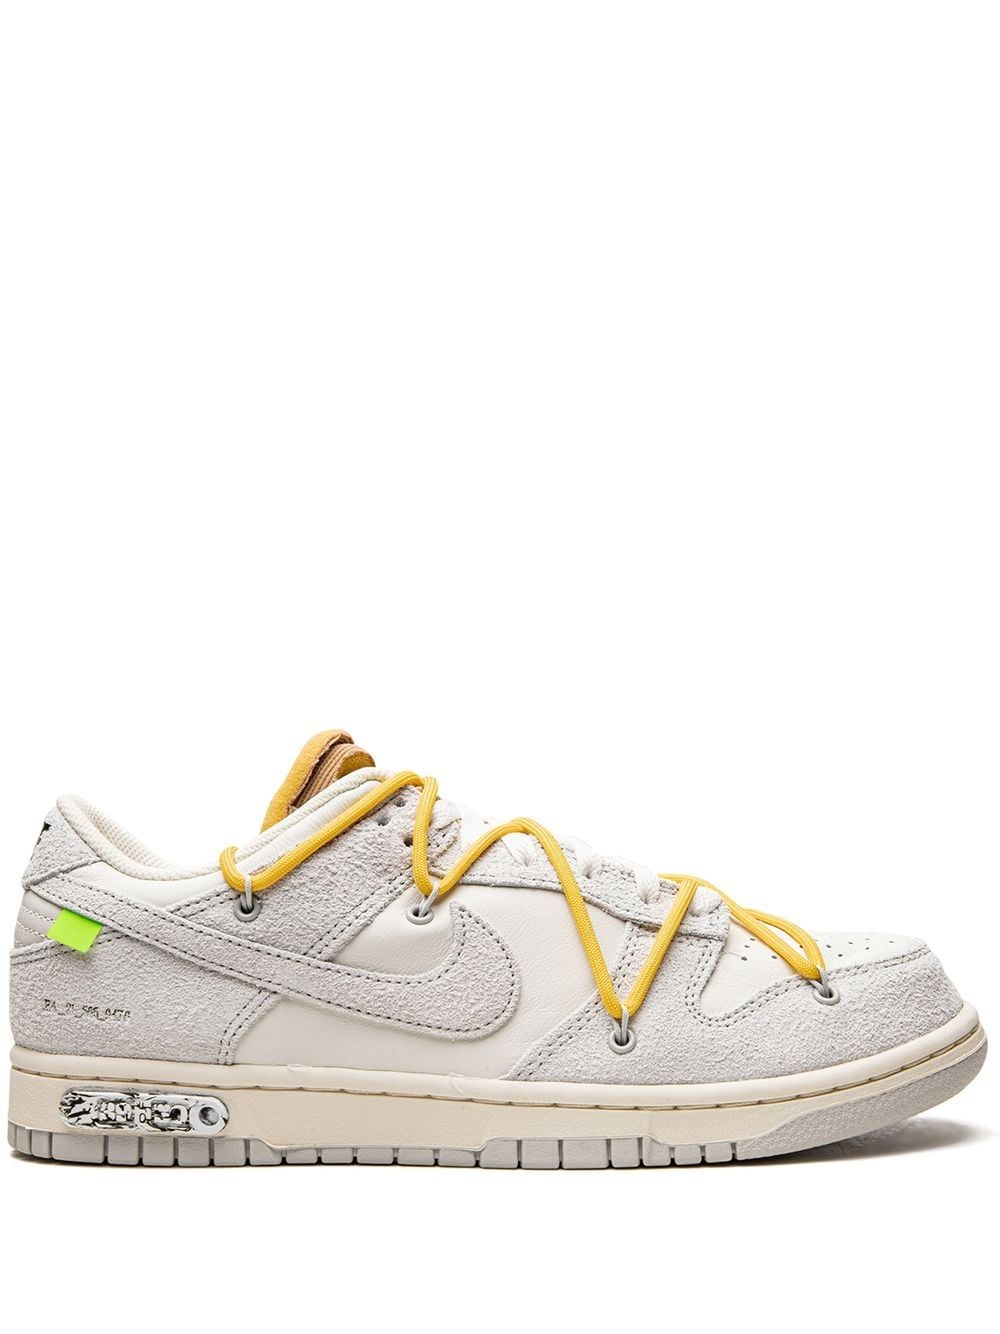 Off-White x Nike Dunk Low Off-White Lot 39